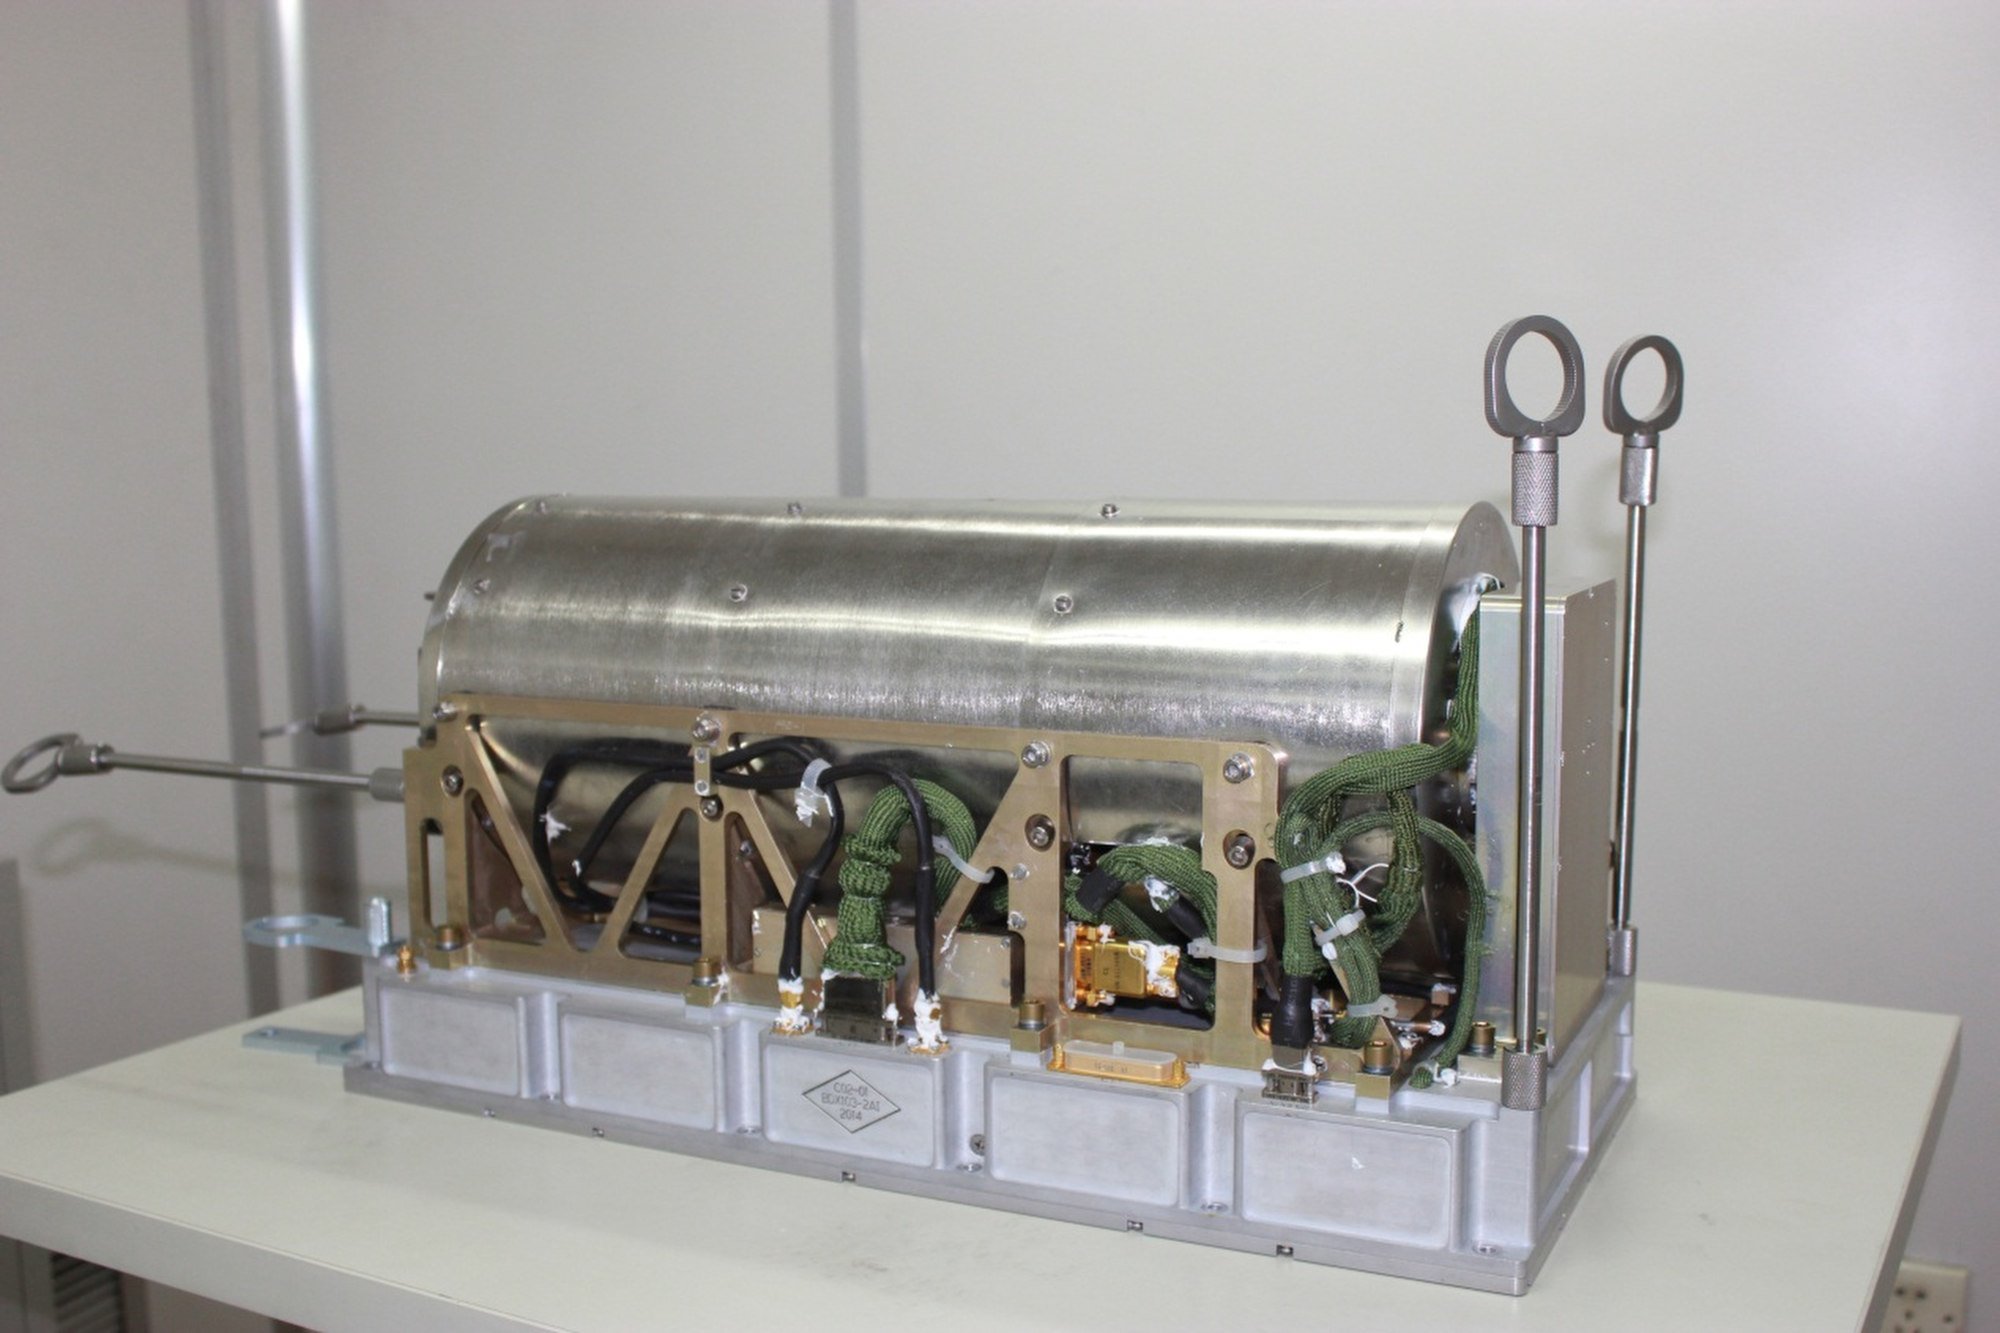 Most of the new generation BDS-3 satellites are equipped with hydrogen maser clocks. Photo: Handout